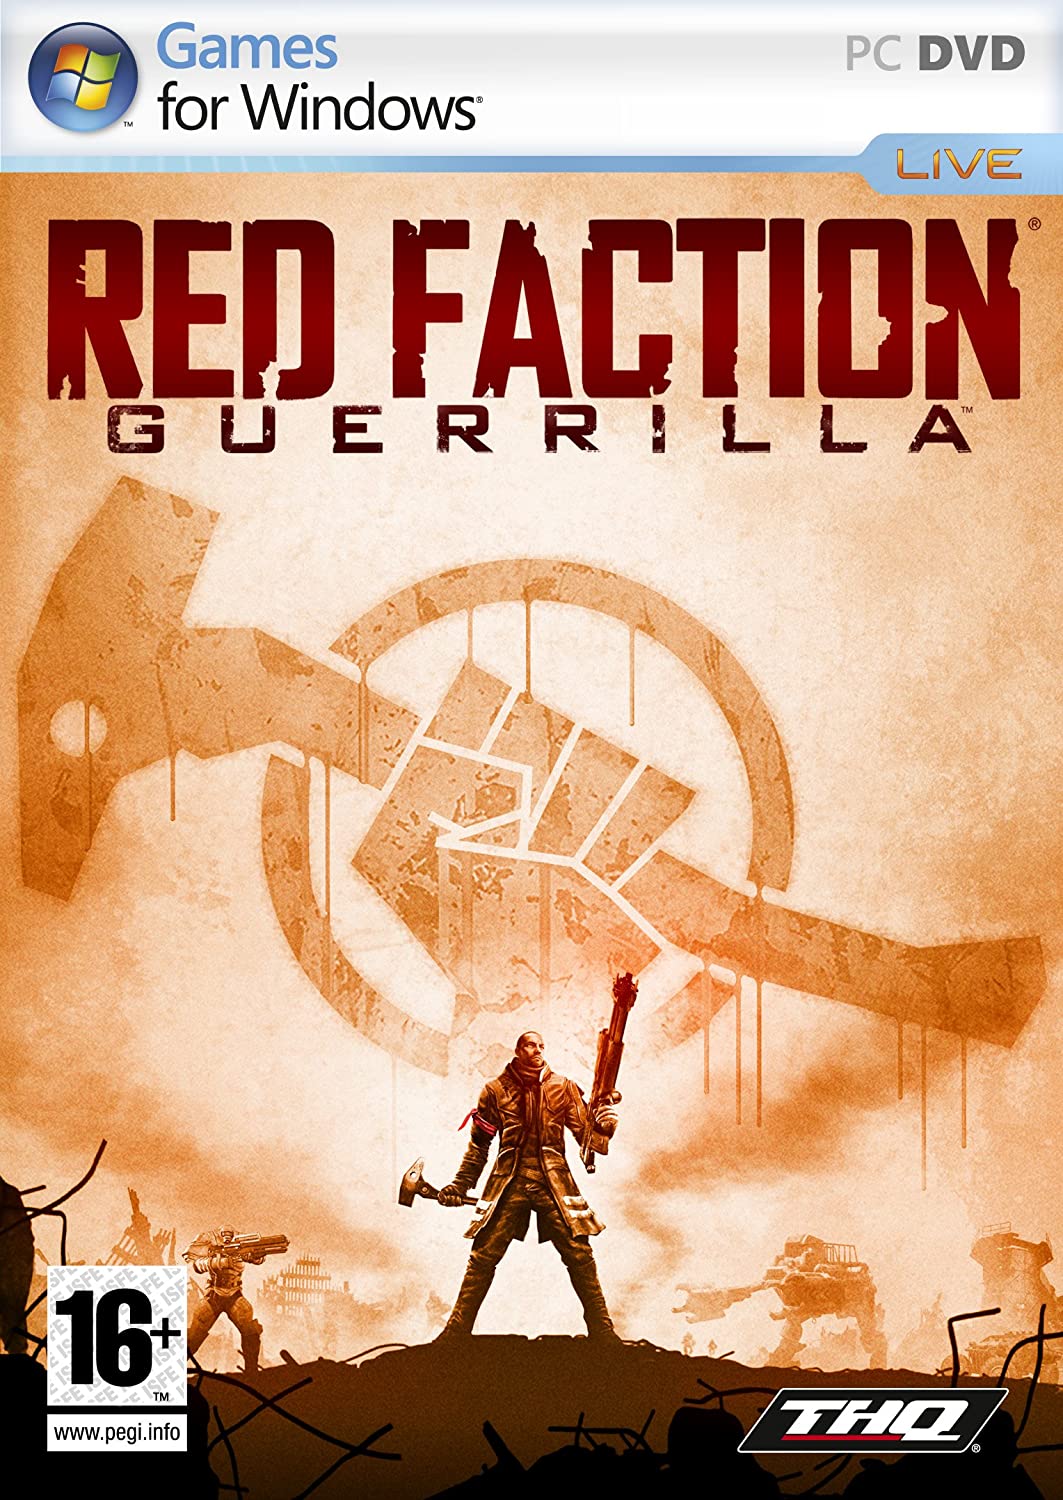 Red Faction: Guerrilla (PC DVD)